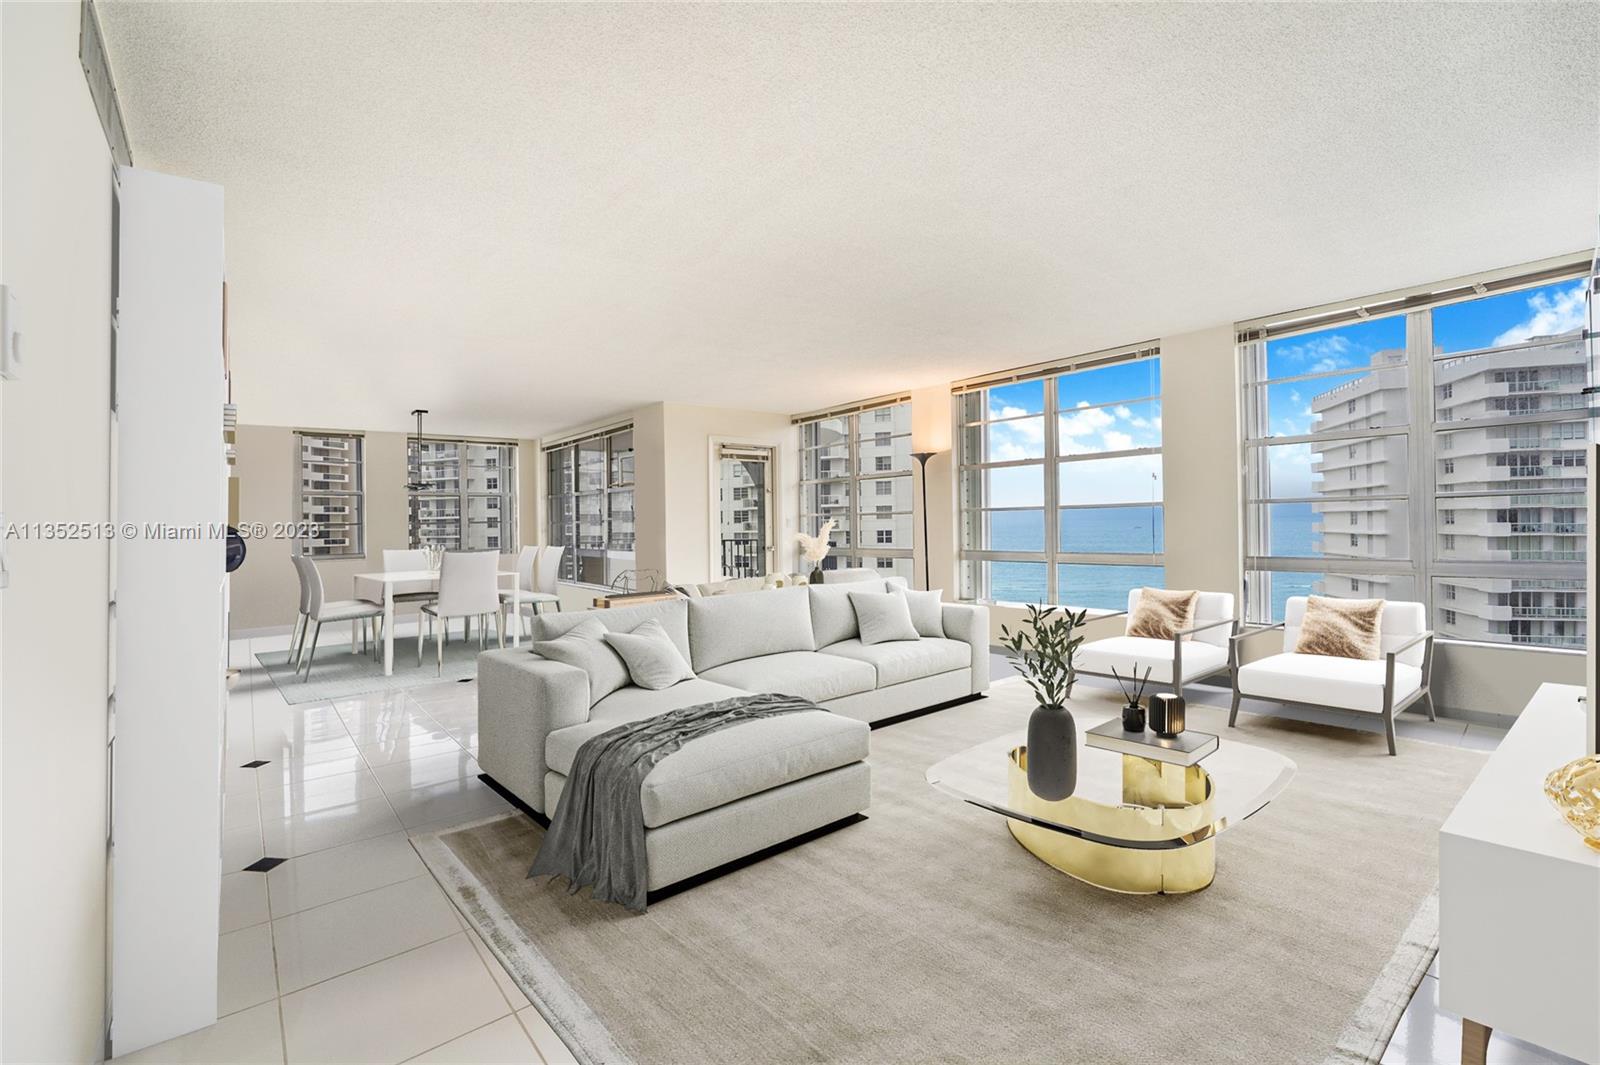 Photo 1 of Fifty Six-sixty Collins A Apt 11C in Miami Beach - MLS A11352513